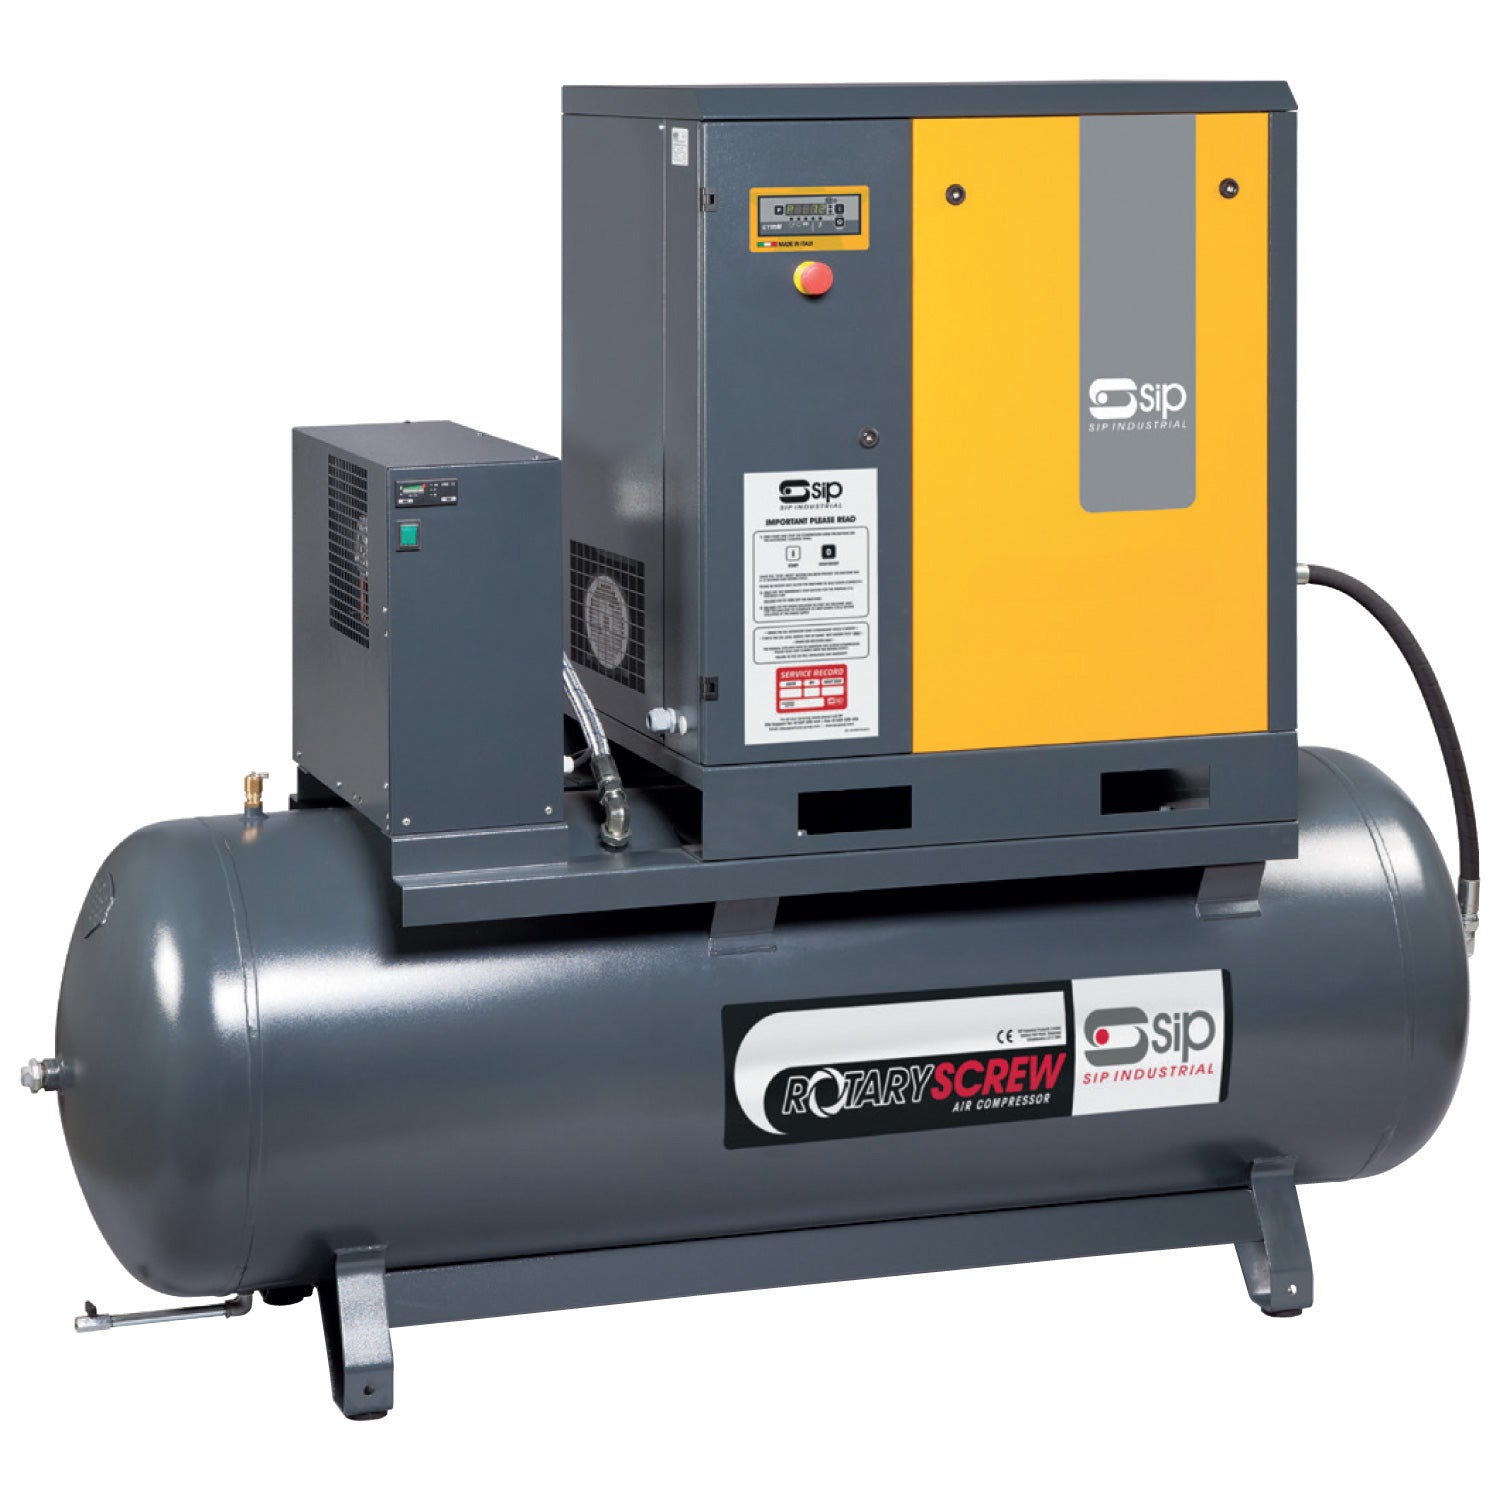 SIP RS08-10-270BD/RD 270ltr Rotary Screw Compressor with Dryer